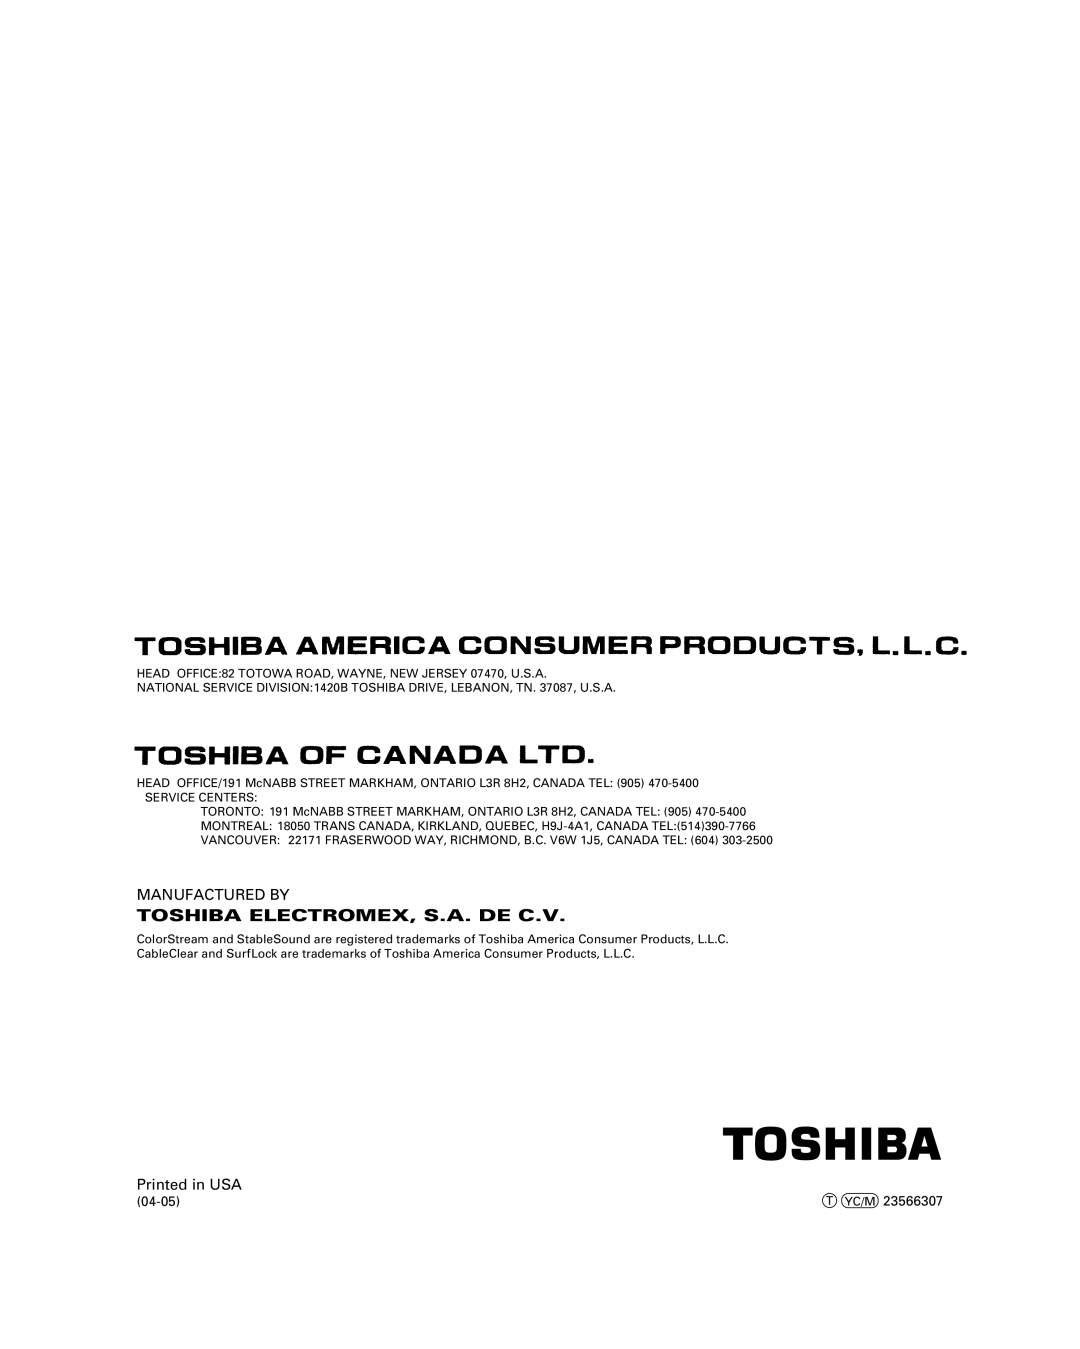 Toshiba 26HL84 owner manual Toshiba Electromex, S.A. De C.V, Manufactured By, Printed in USA, T Yc/M 